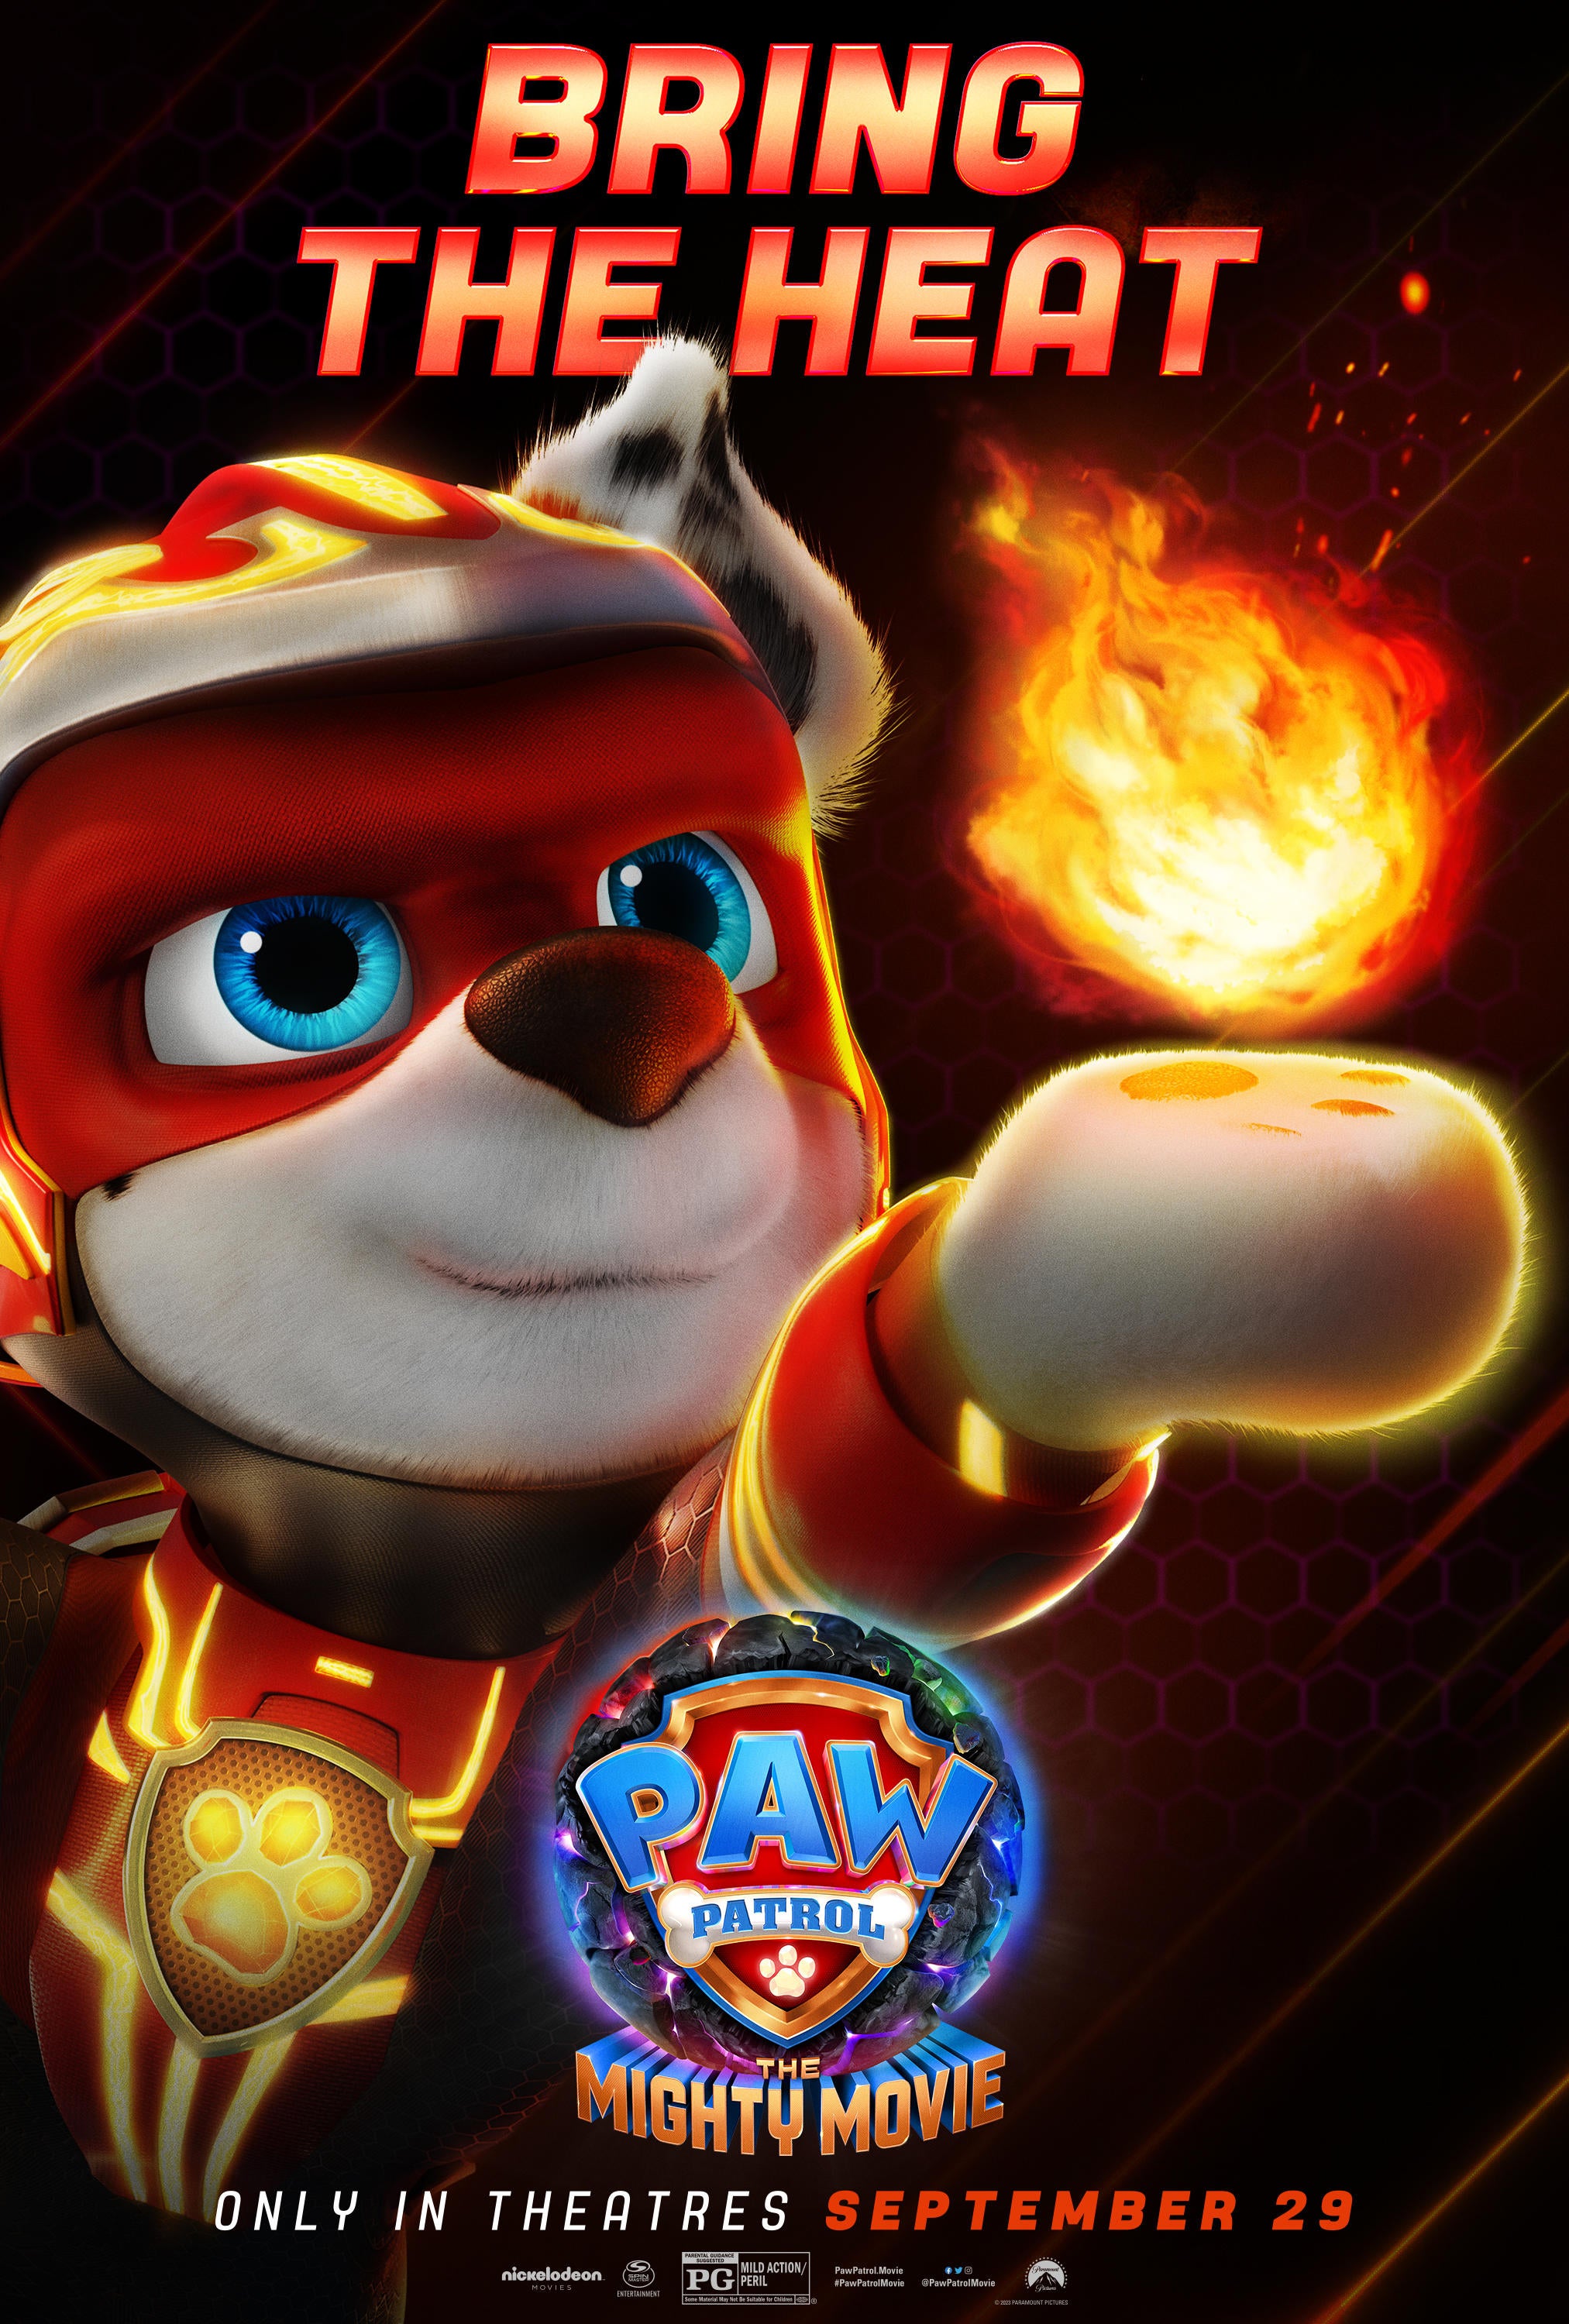 PAW Patrol: The Mighty Movie Character Posters: Marshall